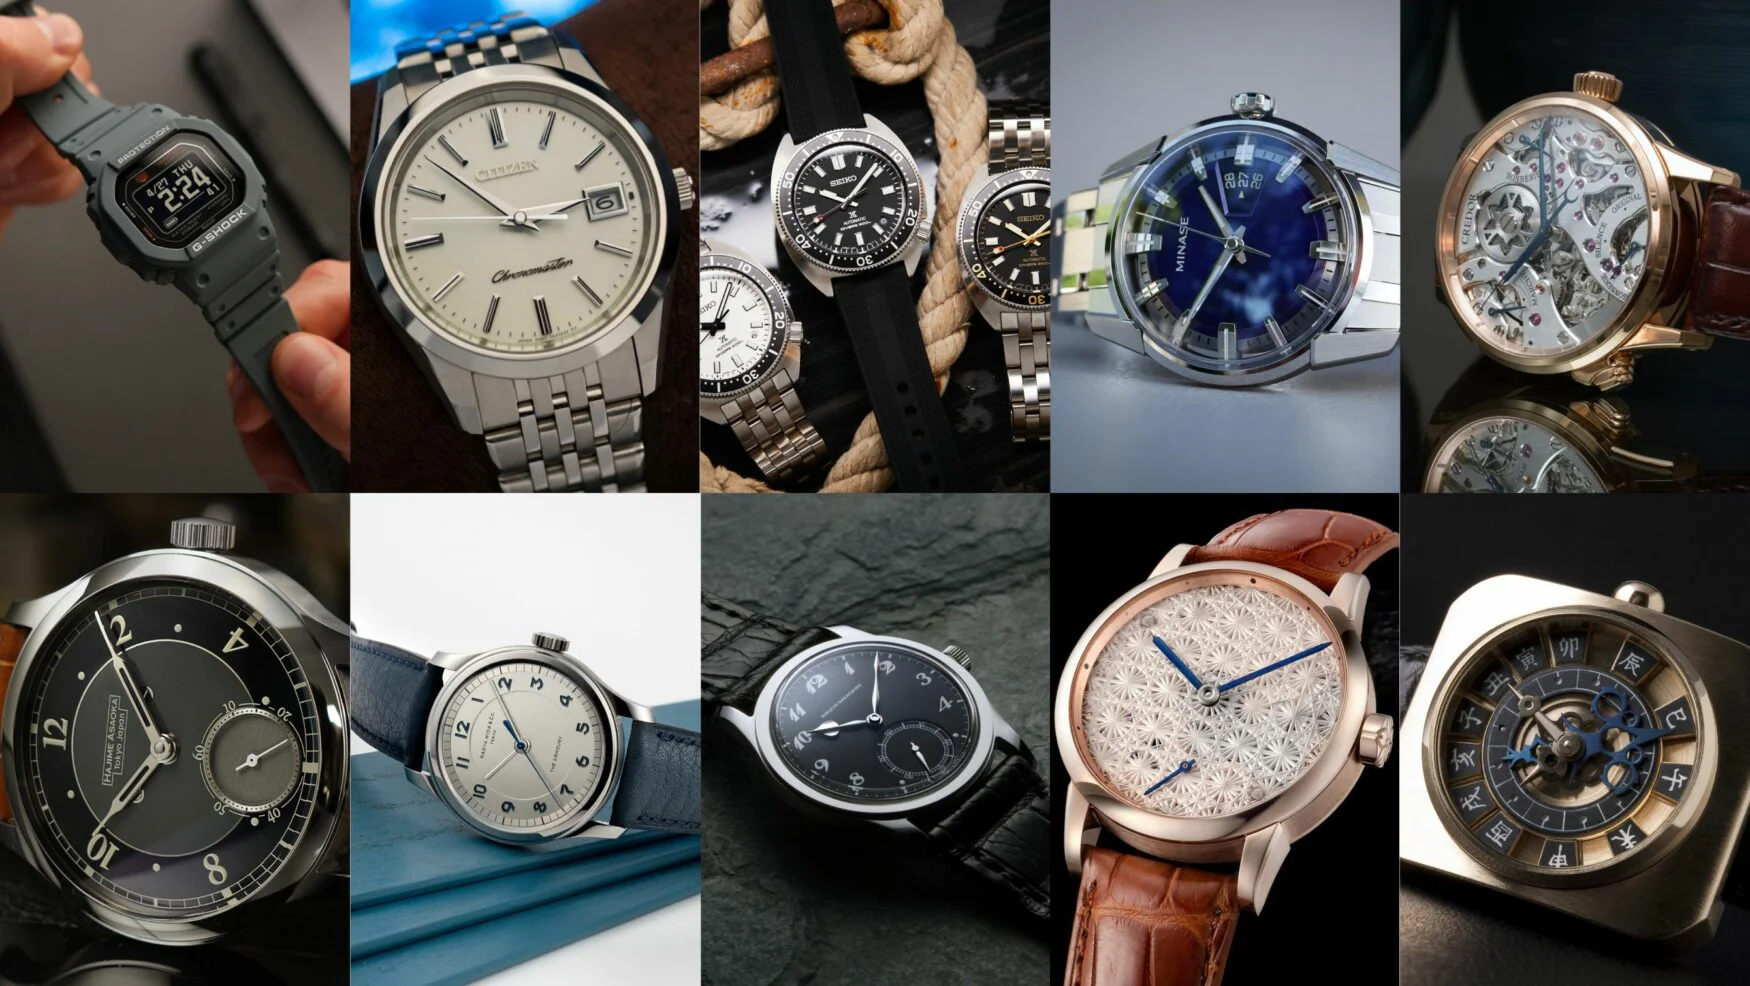 Top 15 Swiss Watch Brands Of All Time - The Watch Company